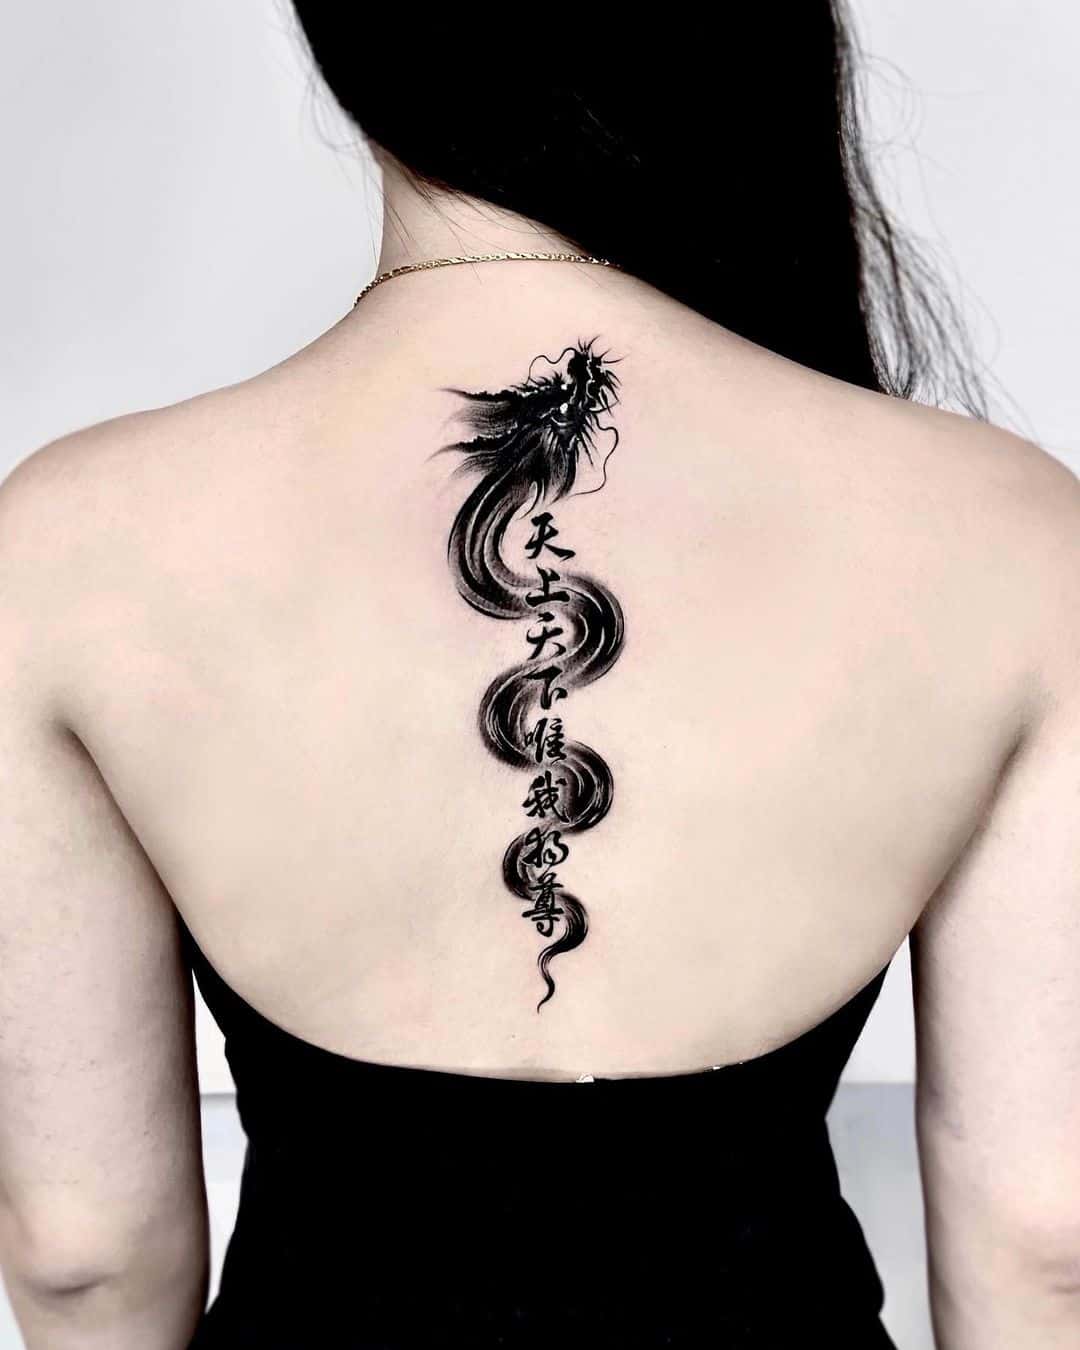 Abstract tattoo on back by jing.tattoo